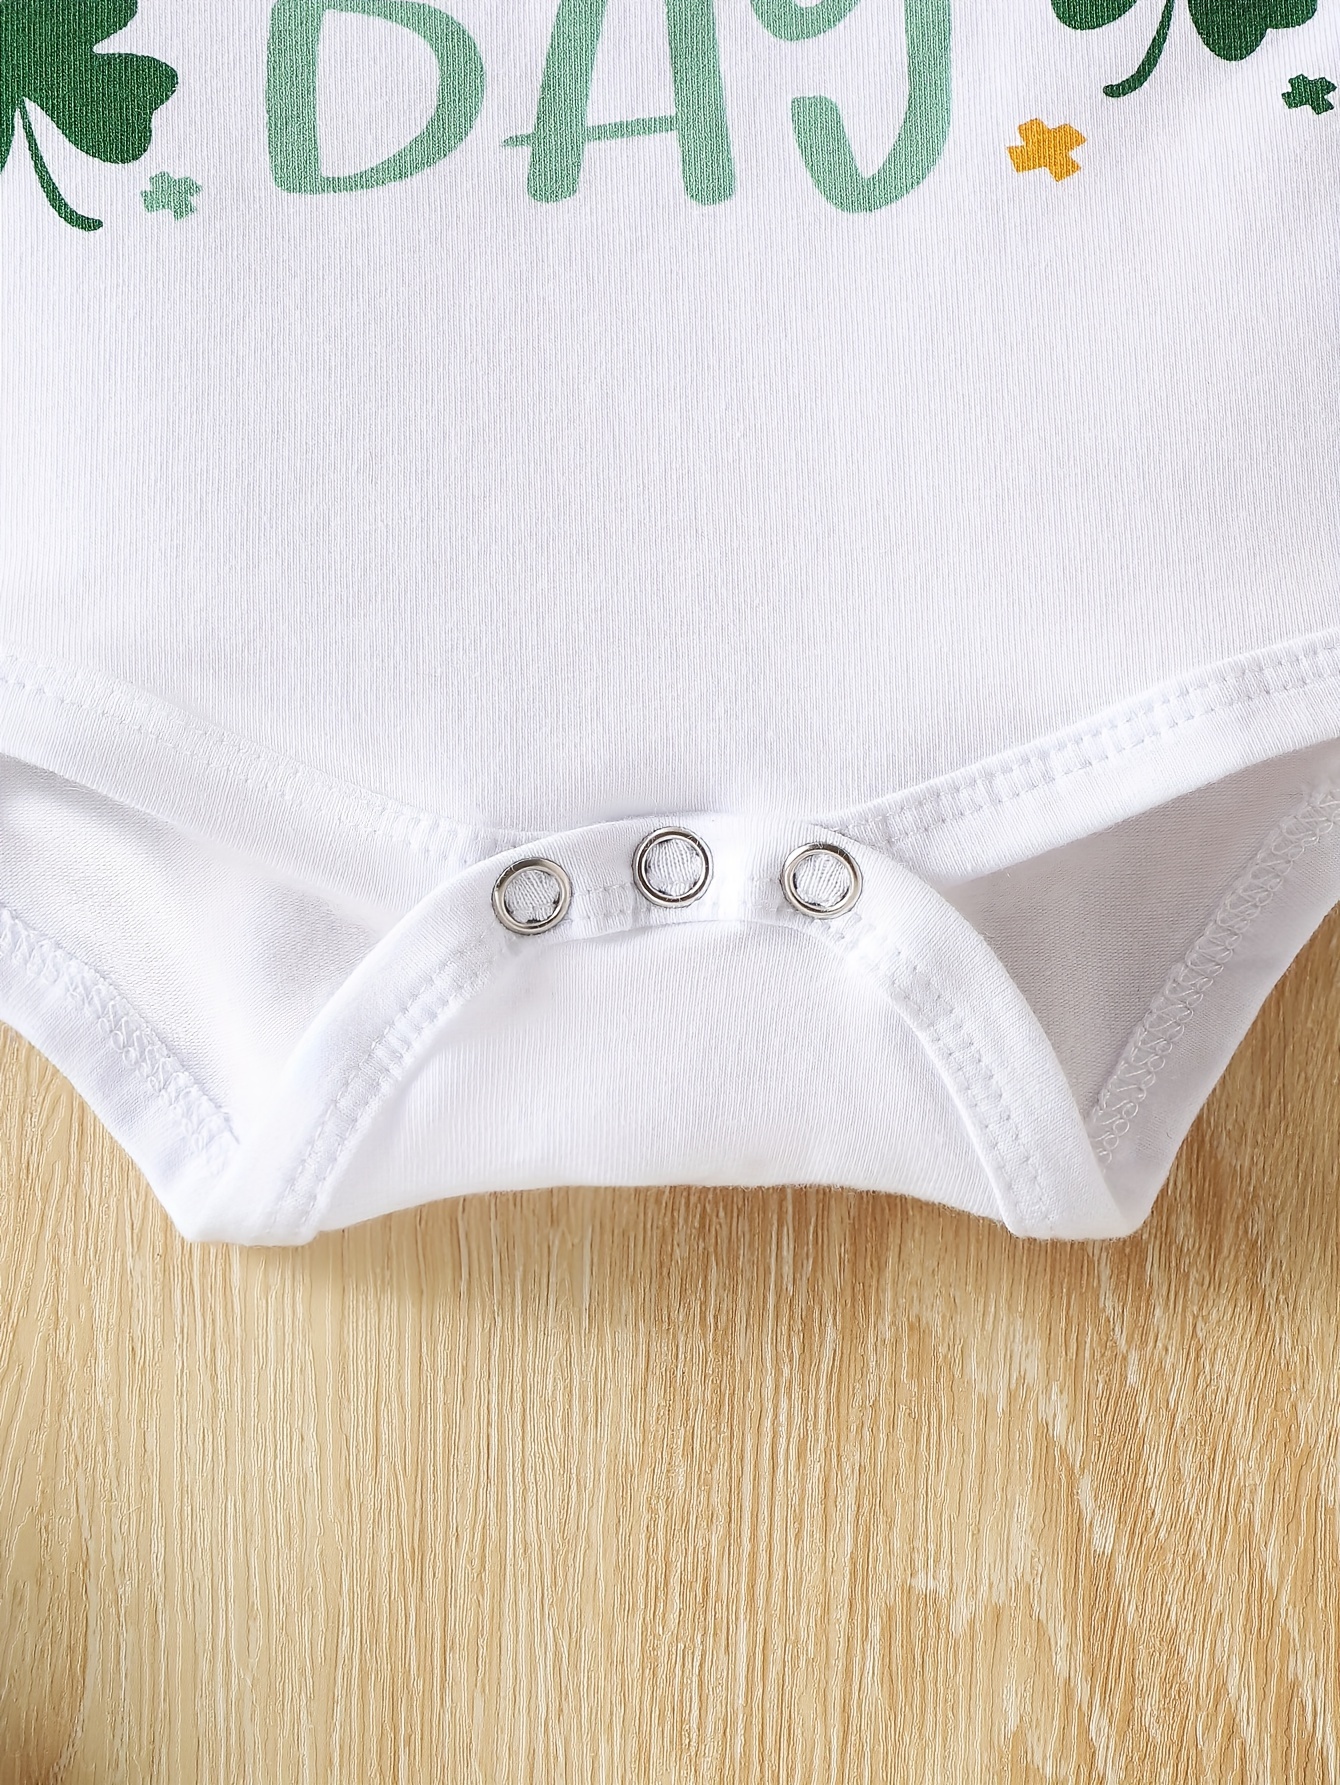 Lucky Clover Underwear: Women's St. Paddy's Outfits